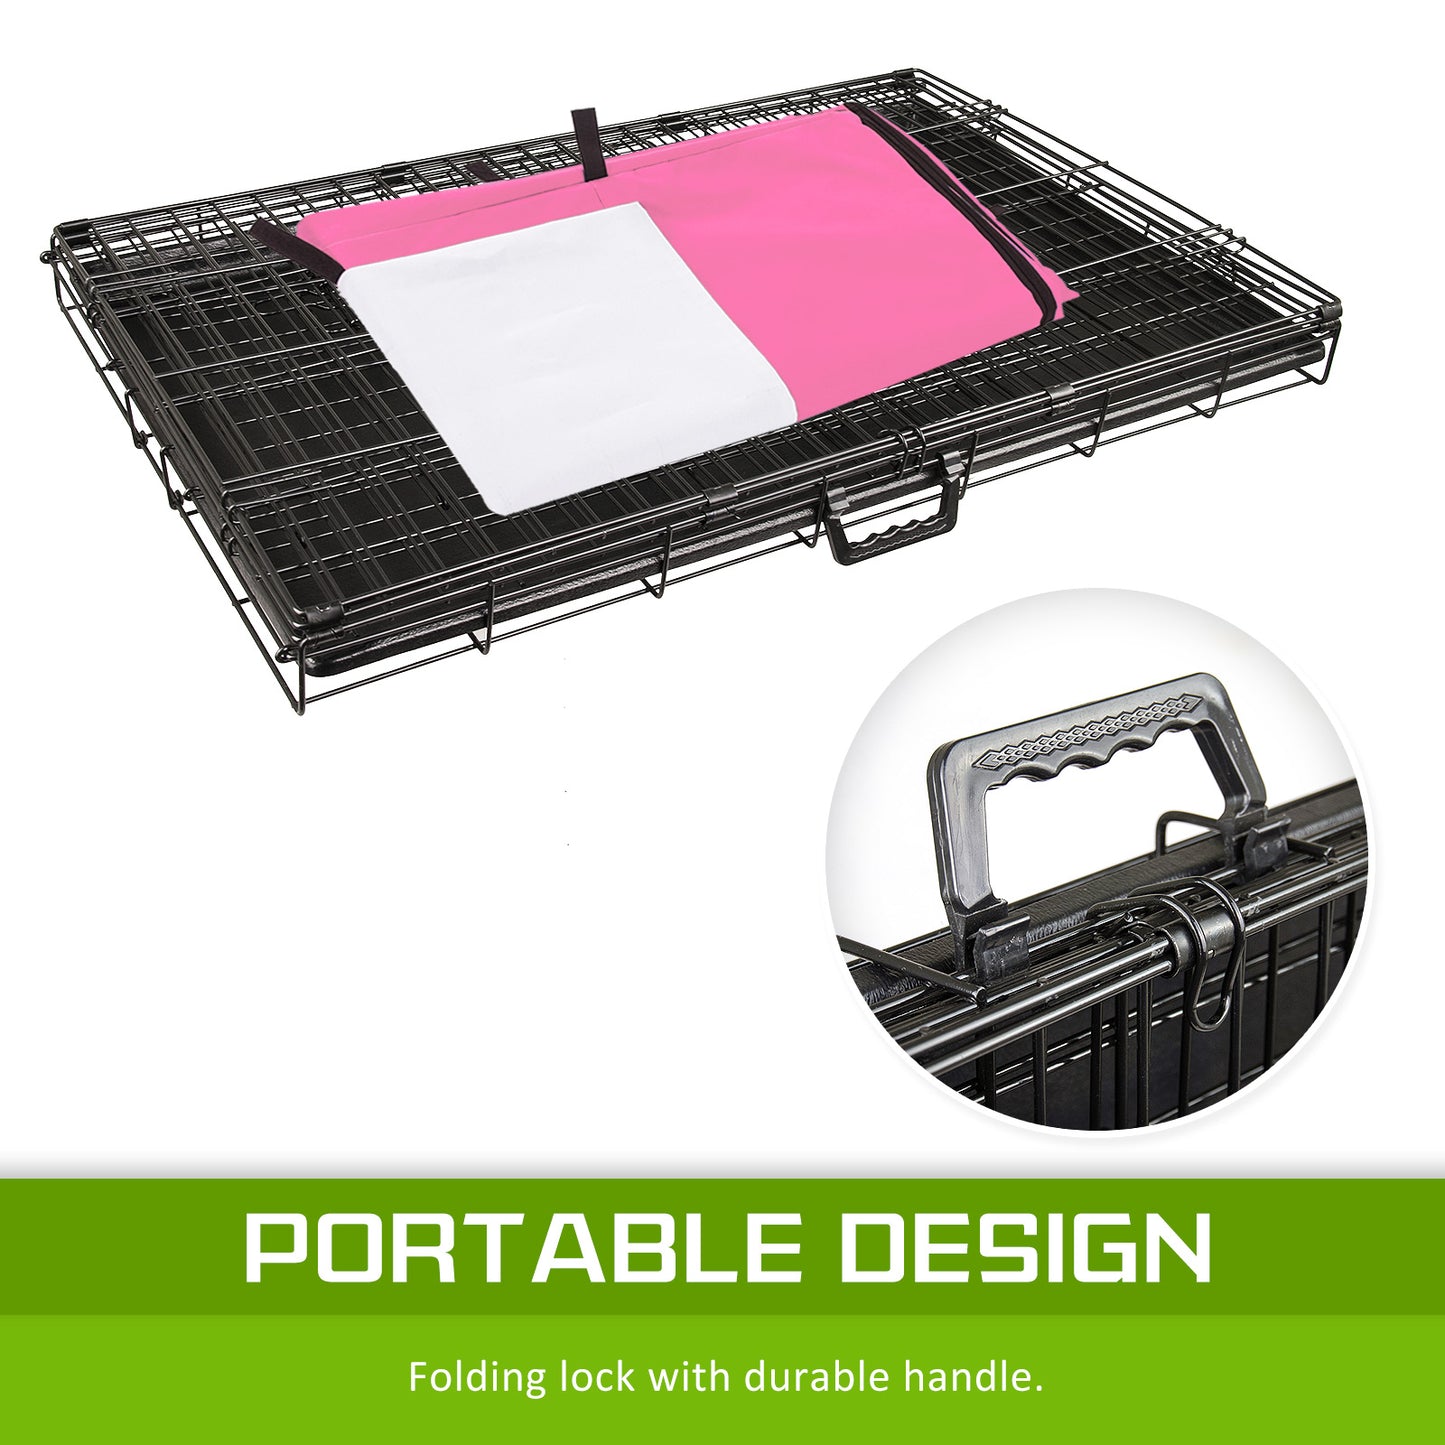 Paw Mate Wire Dog Cage Foldable Crate Kennel 24in with Tray + Pink Cover Combo